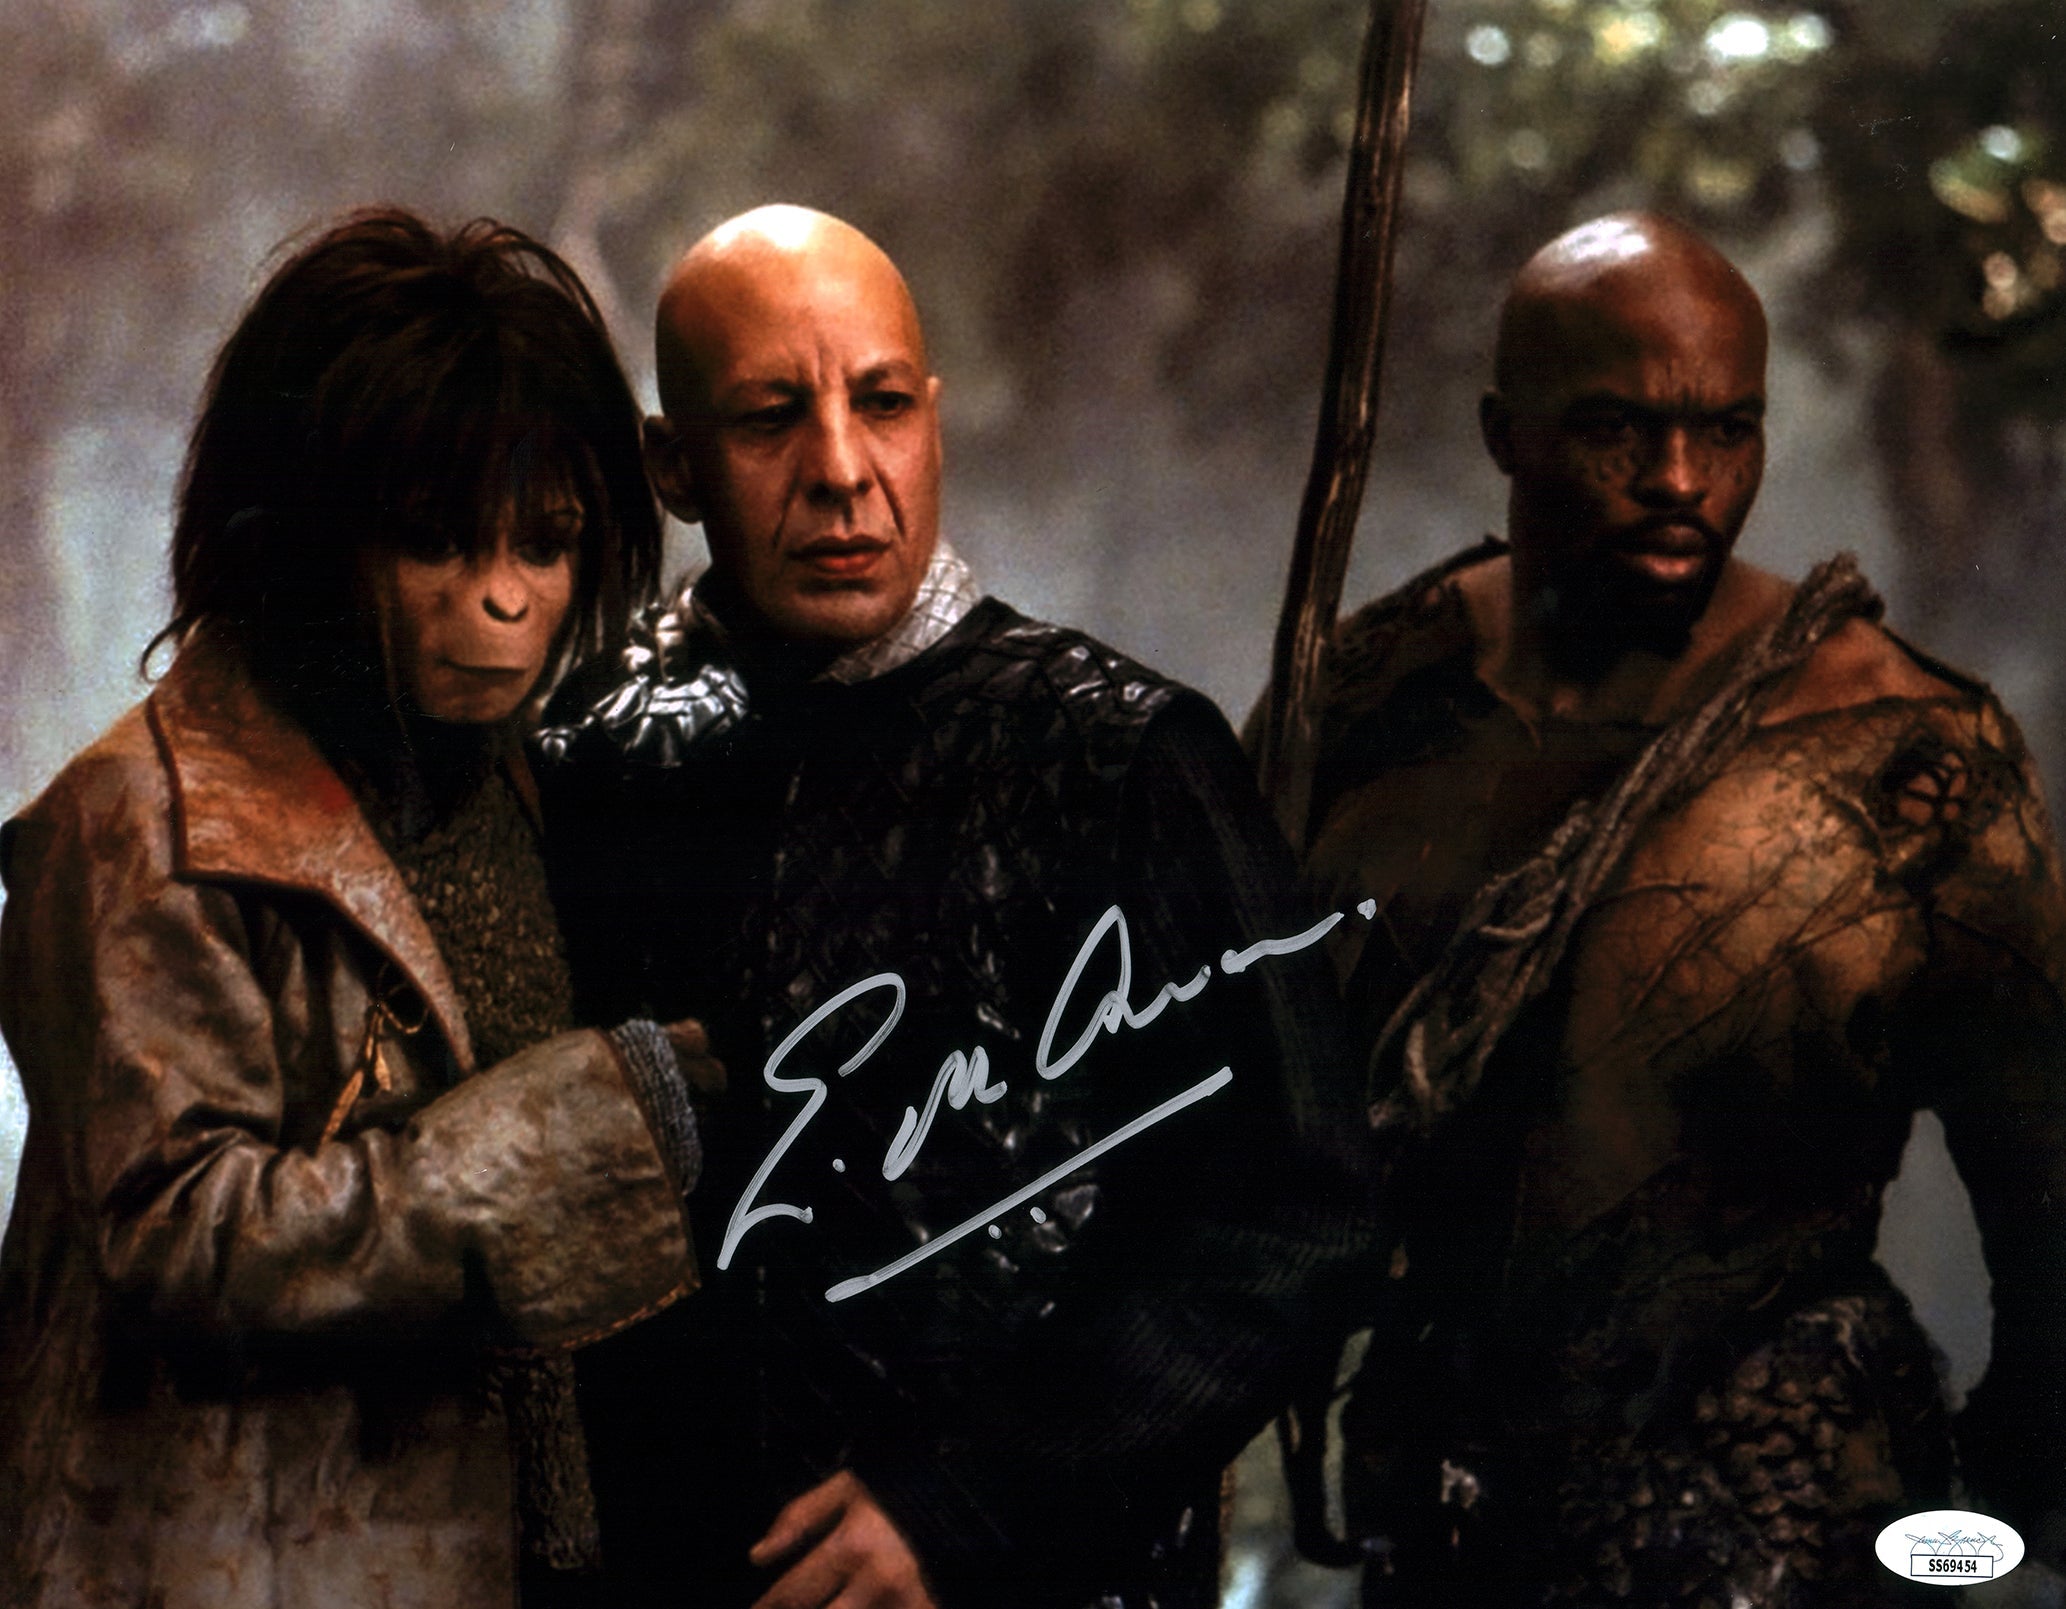 Erick Avari Planet of the Apes 11x14 Photo Poster Signed Autograph JSA Certified COA Auto